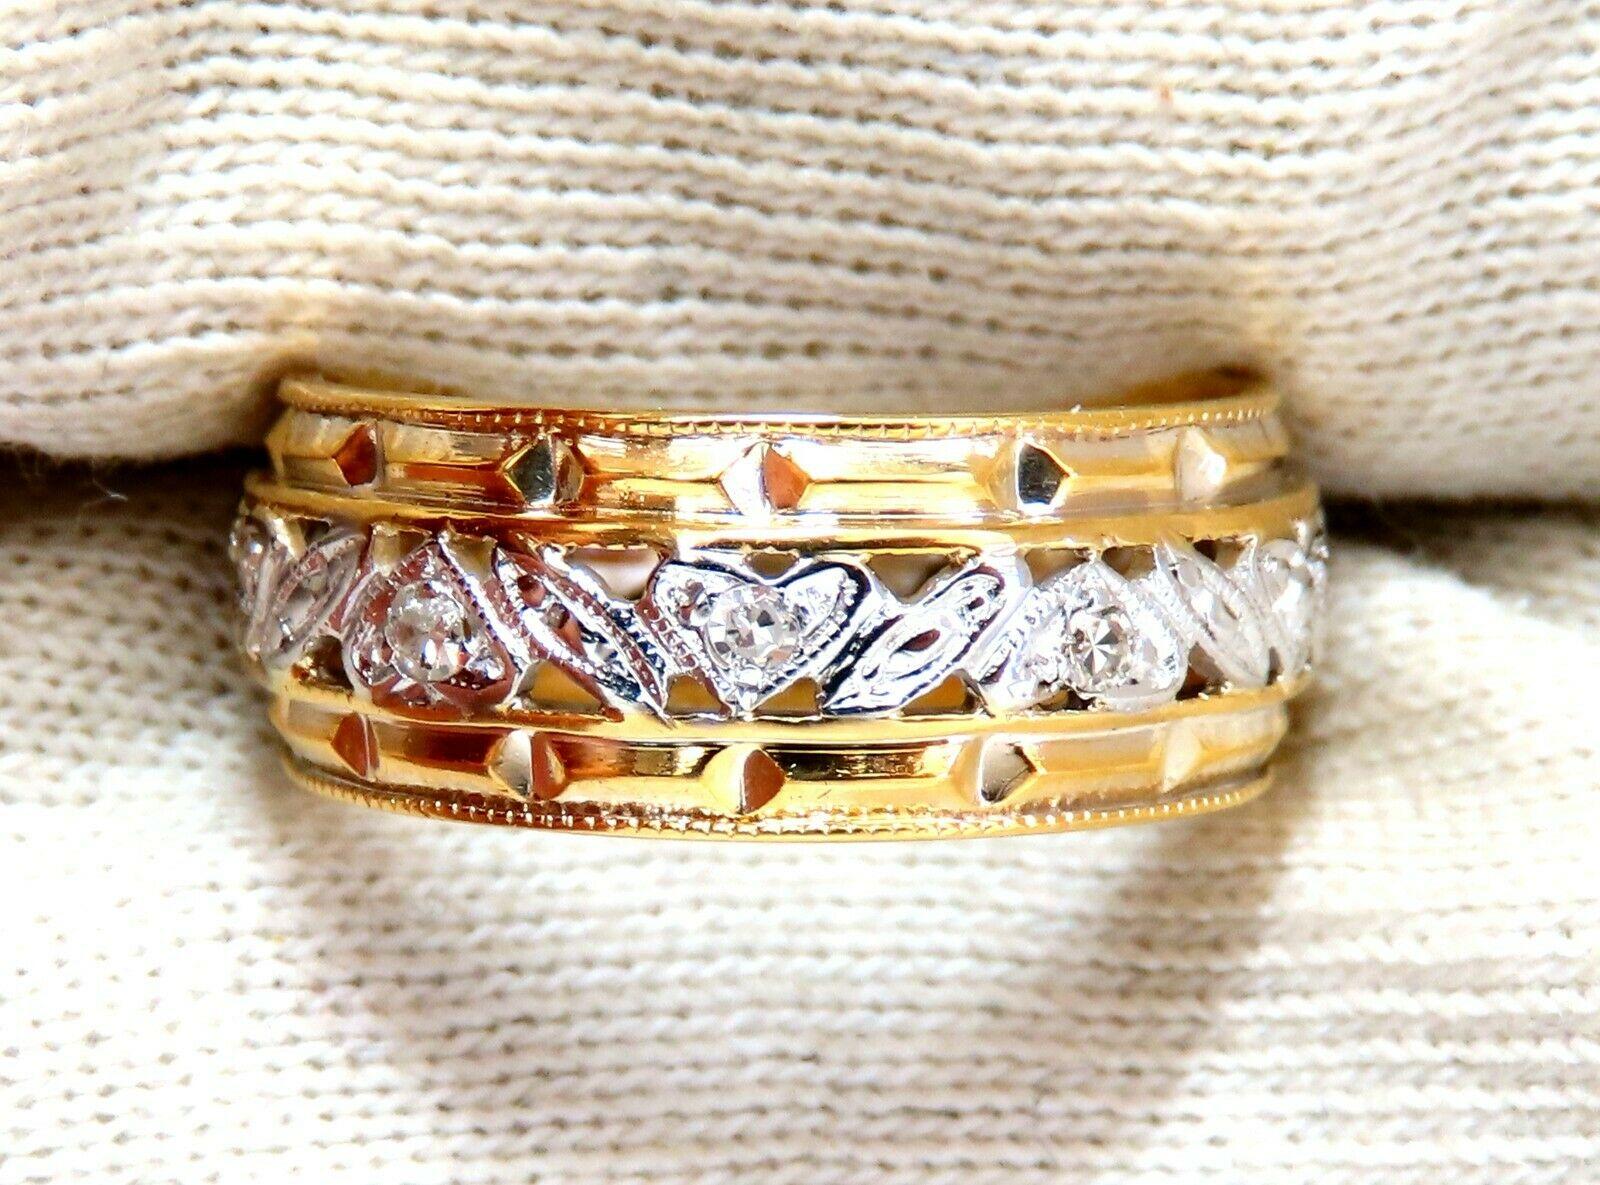 Vintage Everyday Eternity.

.18ct. Natural diamonds

Durable Built.

Vs-2 clarity  G/H color.

14kt yellow gold.

4.6 Grams

Overall ring: 7.6mm diameter

Depth: 2mm

Current ring size: 7